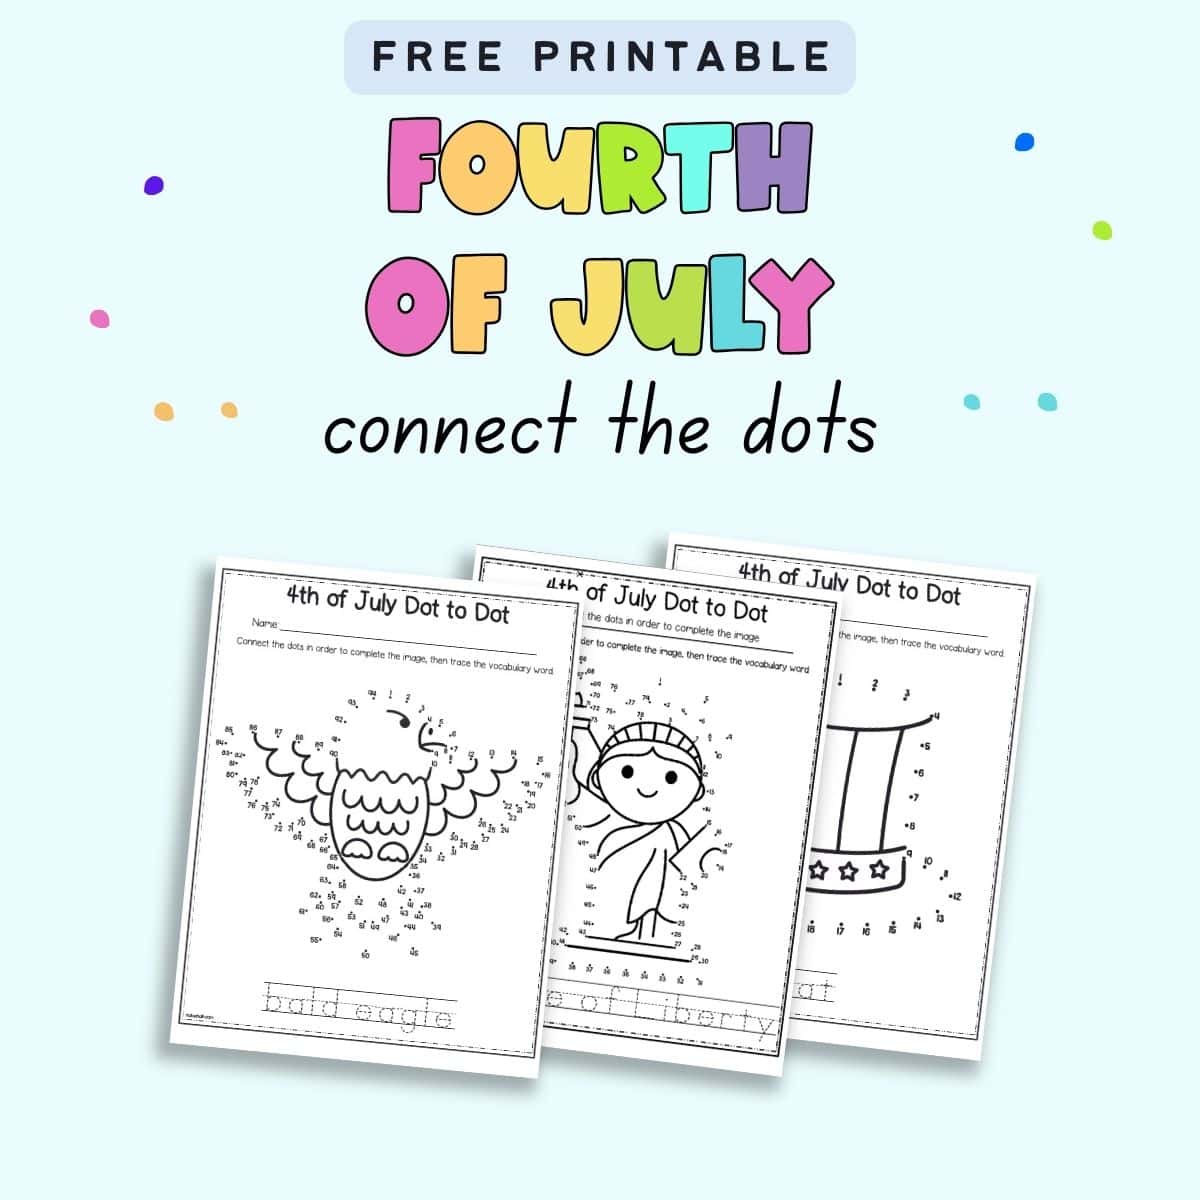 Text "free printable Fourth of July connect the dots" with a. preview of three pages. One shows a bald eagle, the next the Statue of Liberty, and the third a hat. 